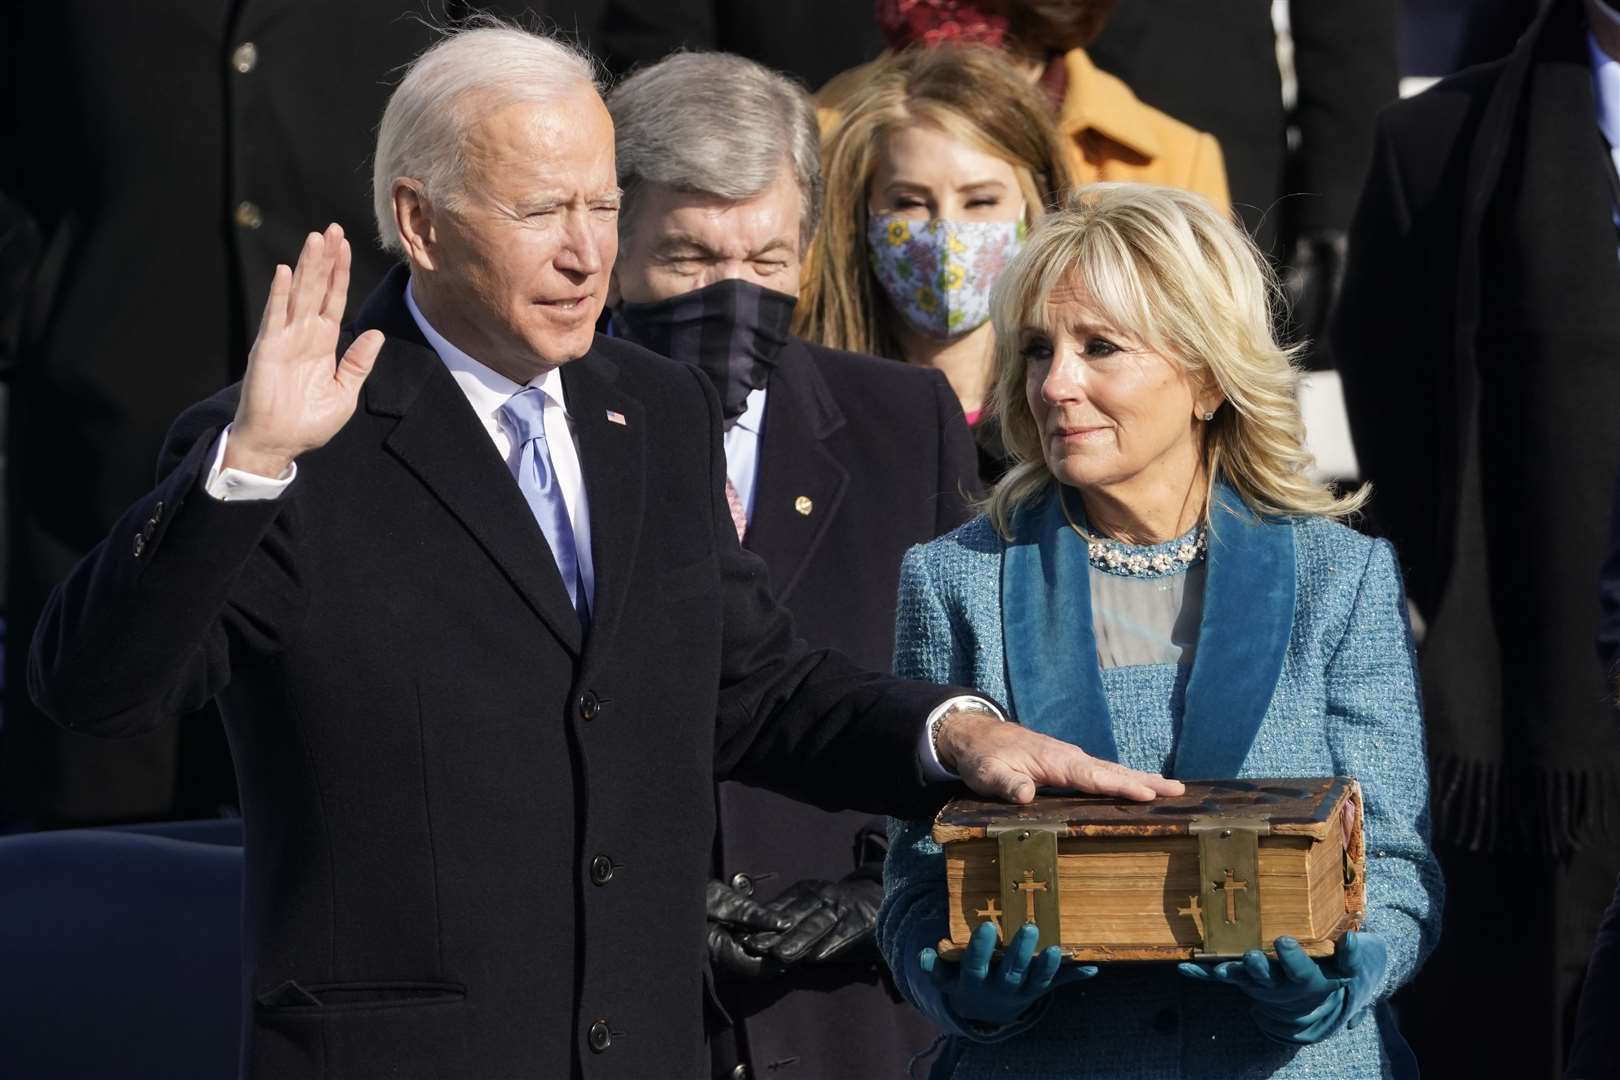 Joe Biden is sworn in as the 46th president of the United States (Andrew Harnik/AP)